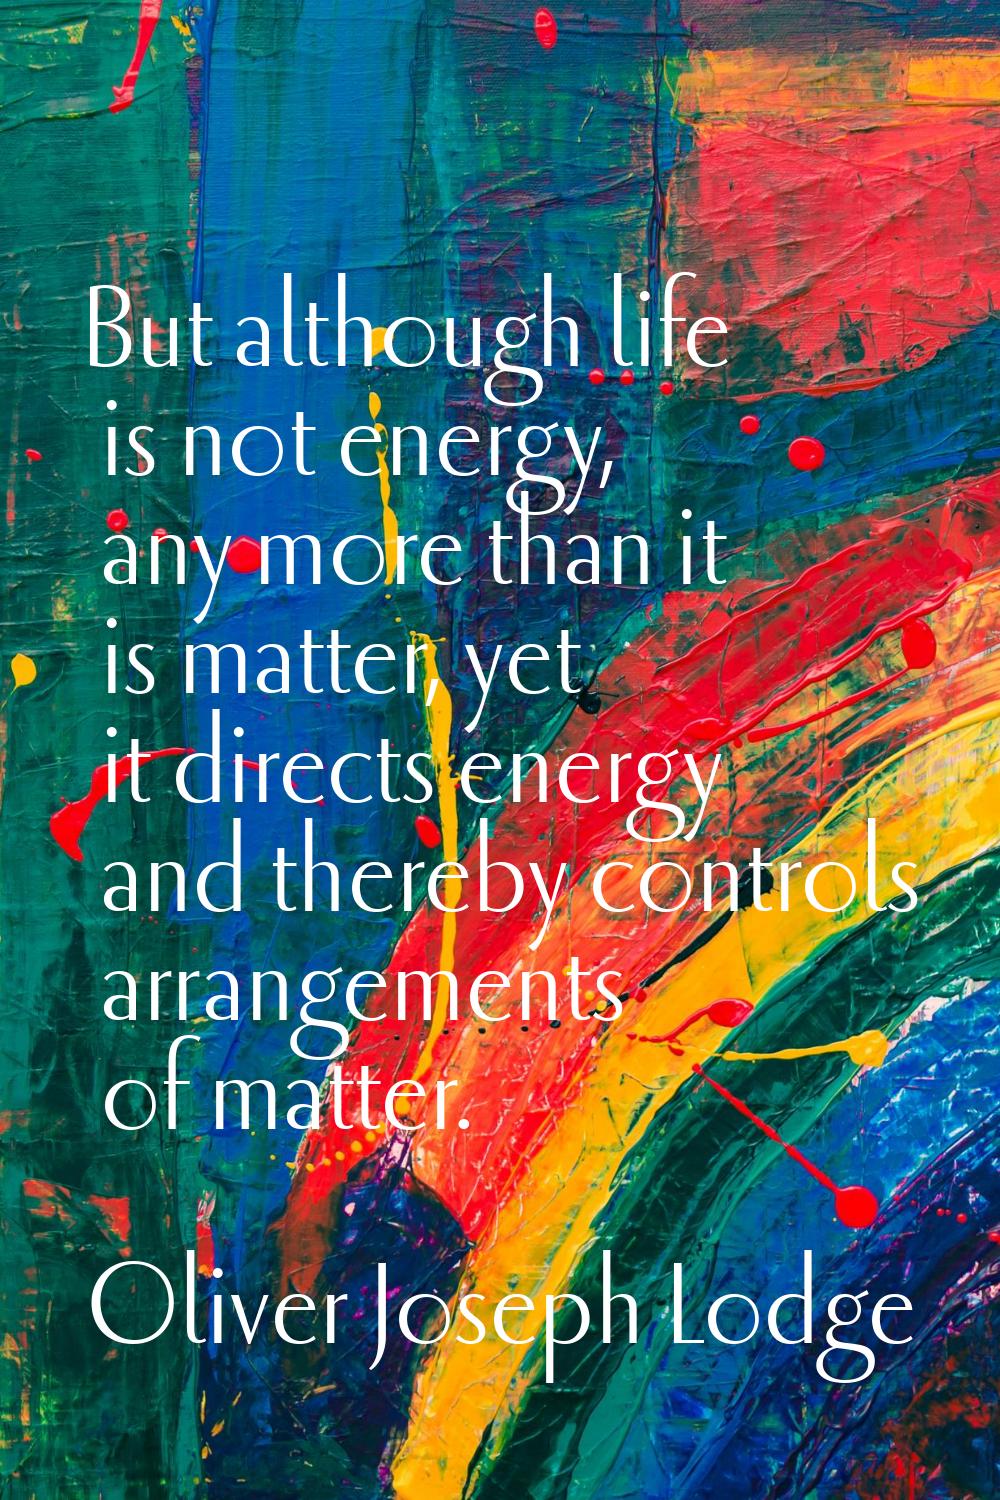 But although life is not energy, any more than it is matter, yet it directs energy and thereby cont